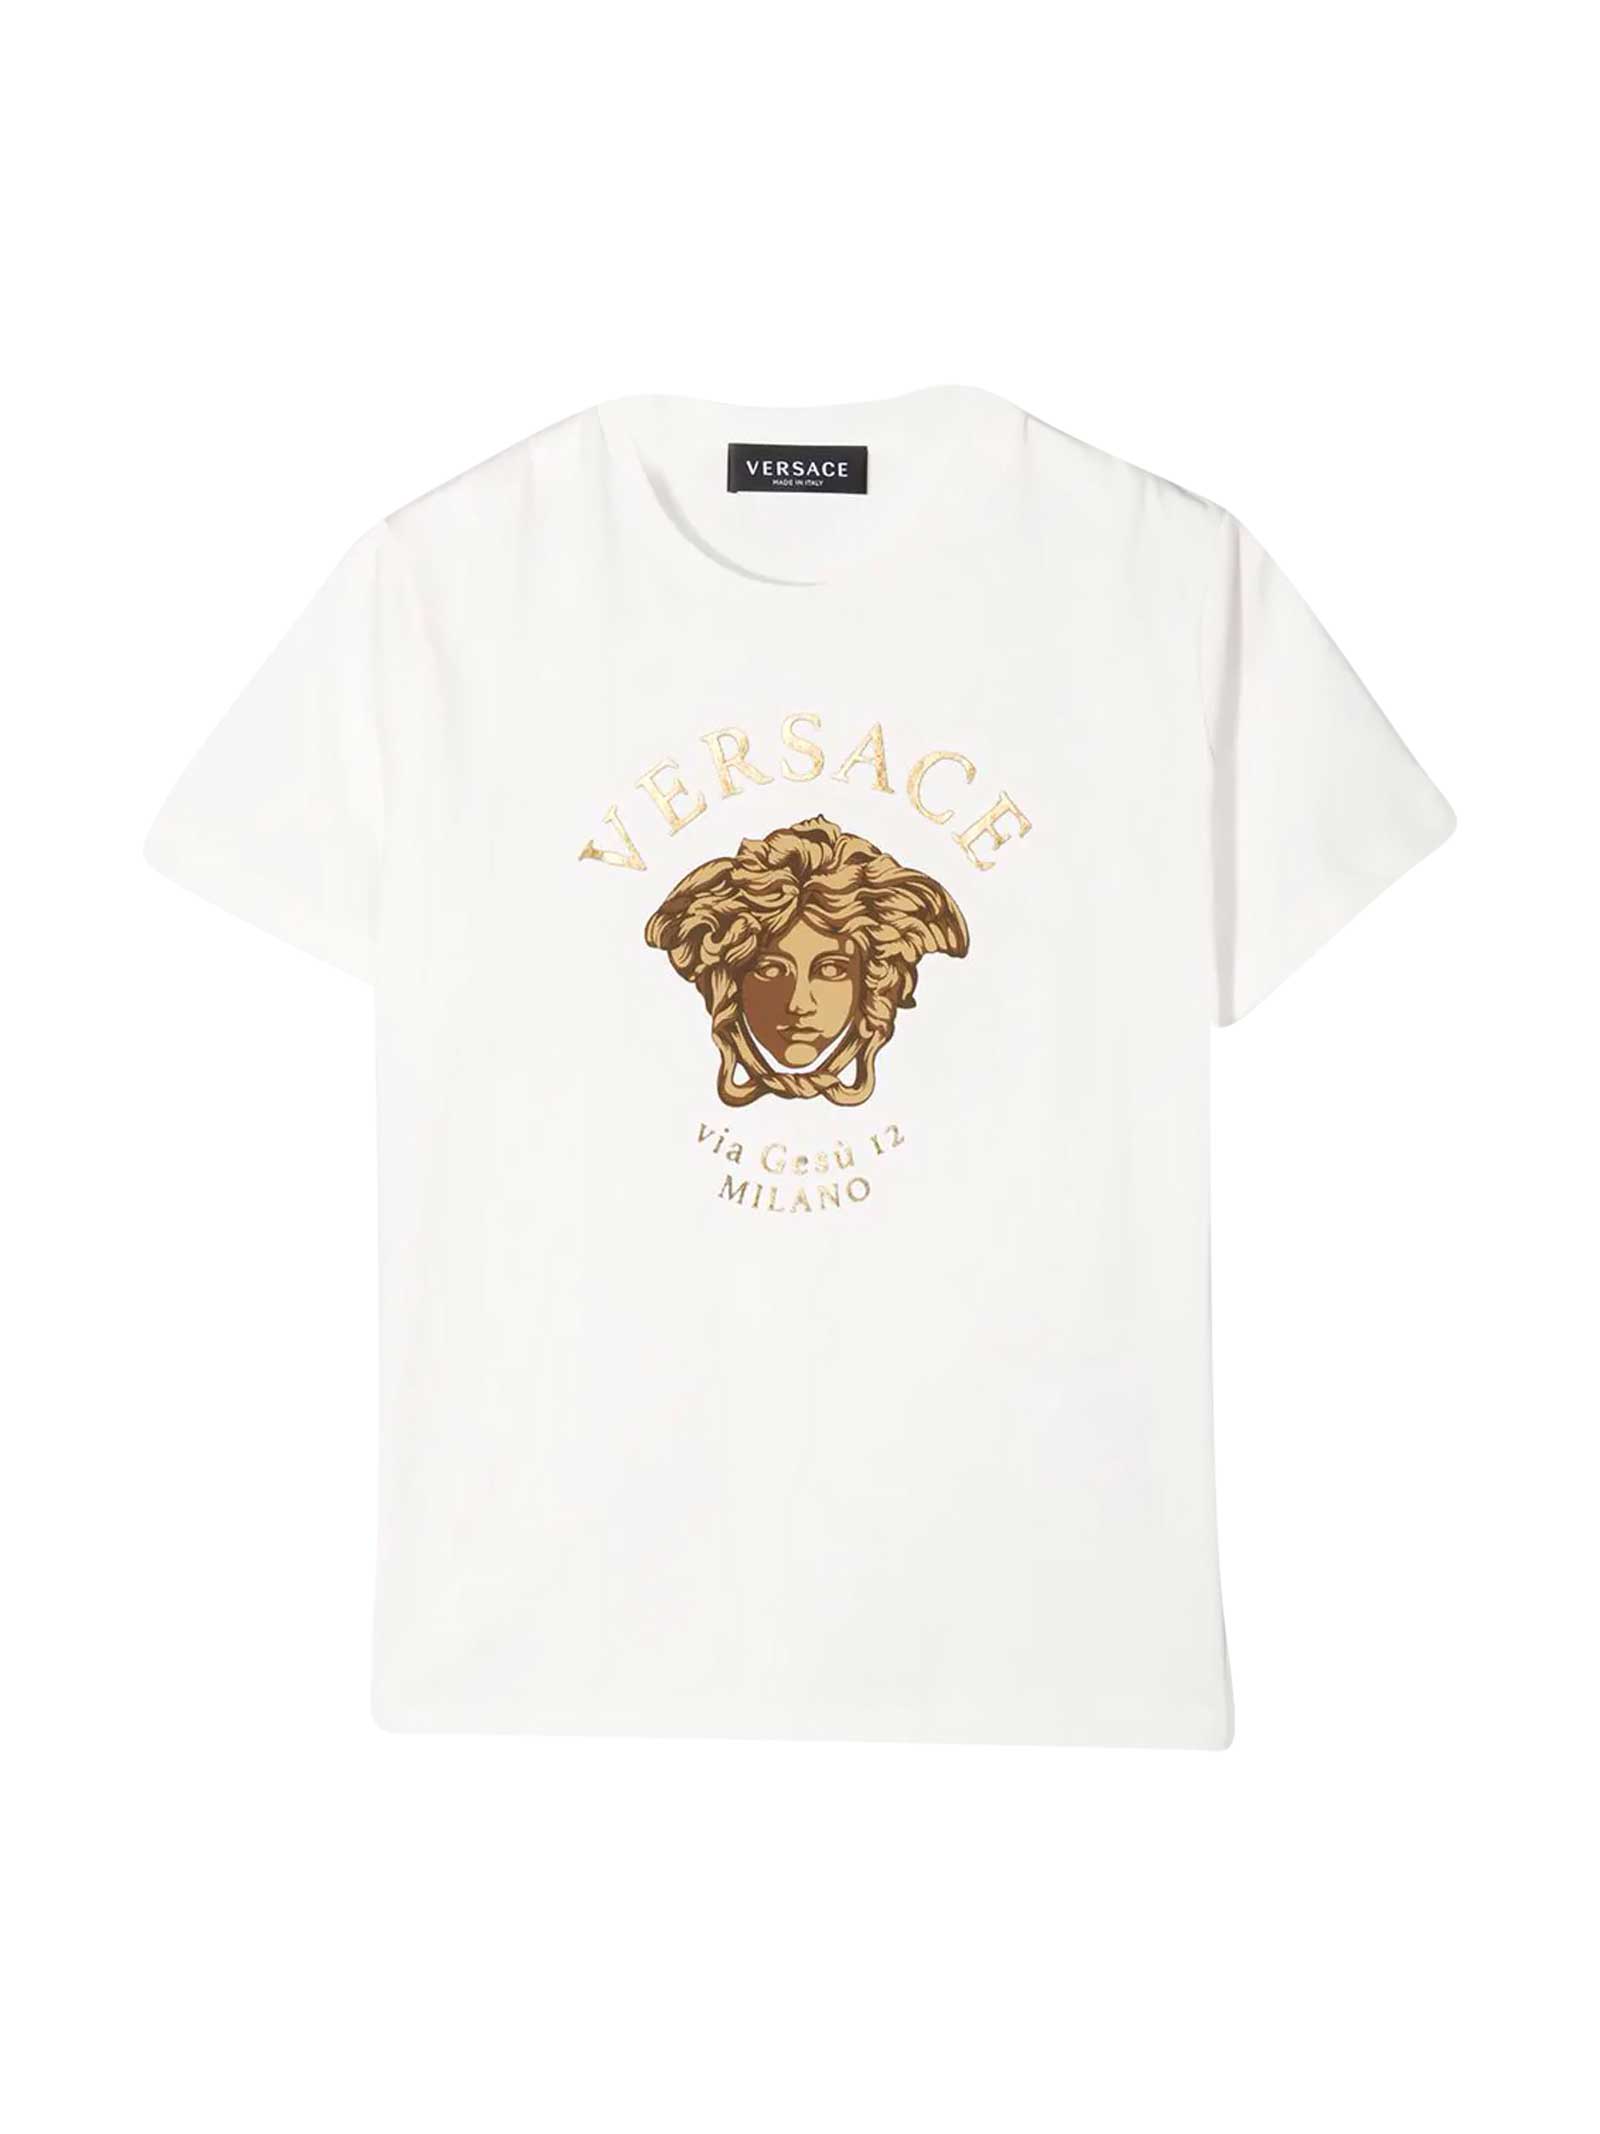 Versace White T-shirt With Frontal Print Young